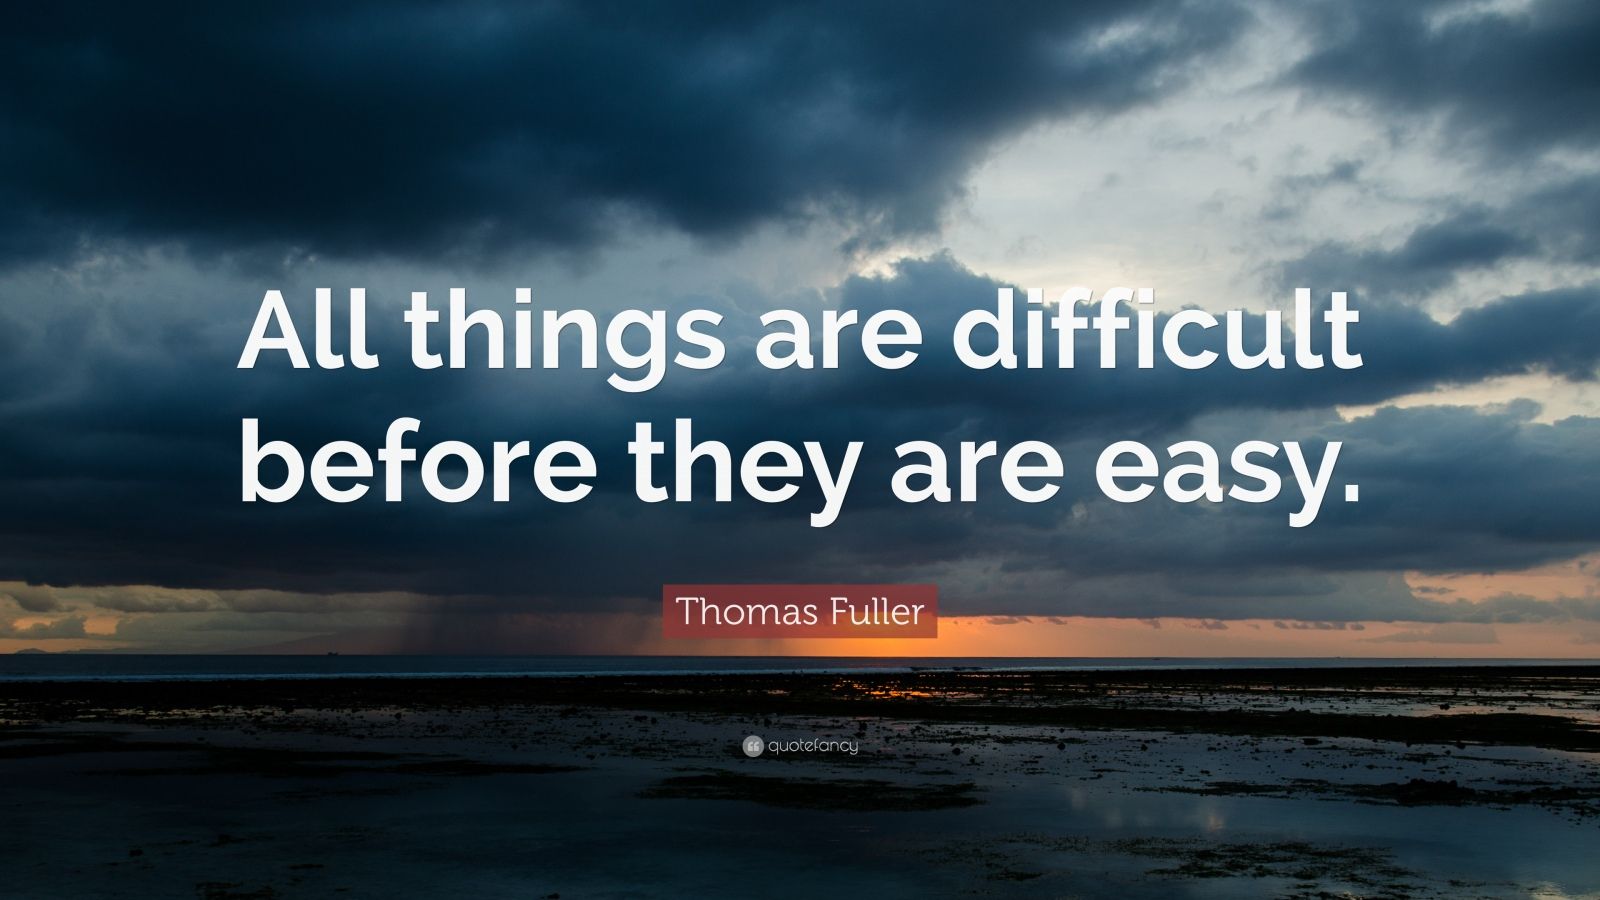 Thomas Fuller Quote: “All things are difficult before they are easy